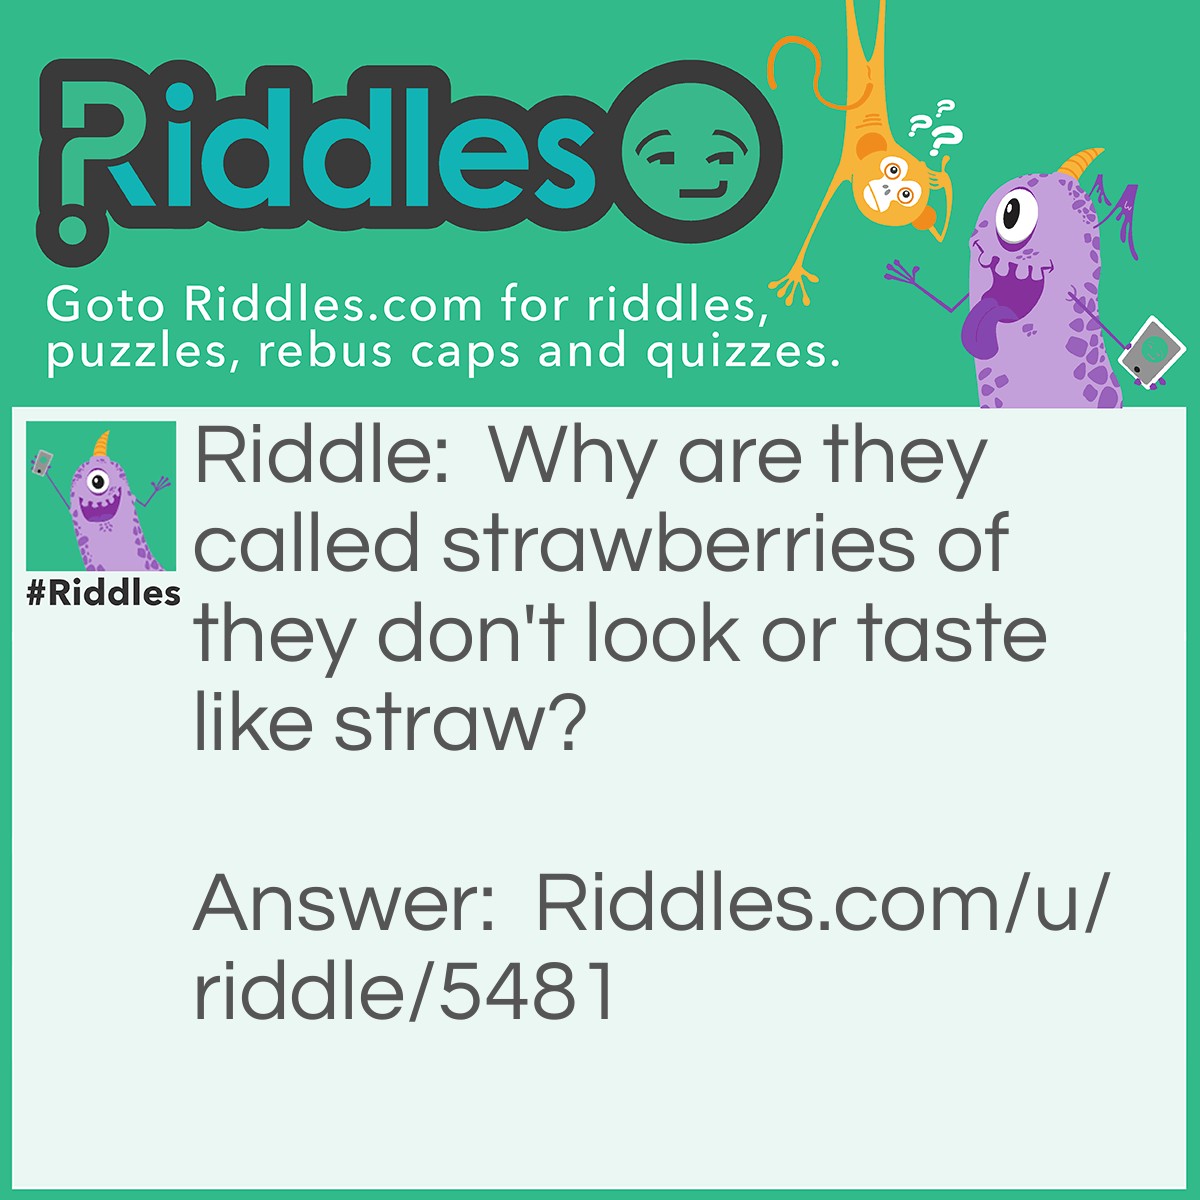 Riddle: Why are they called strawberries of they don't look or taste like straw? Answer: Idk